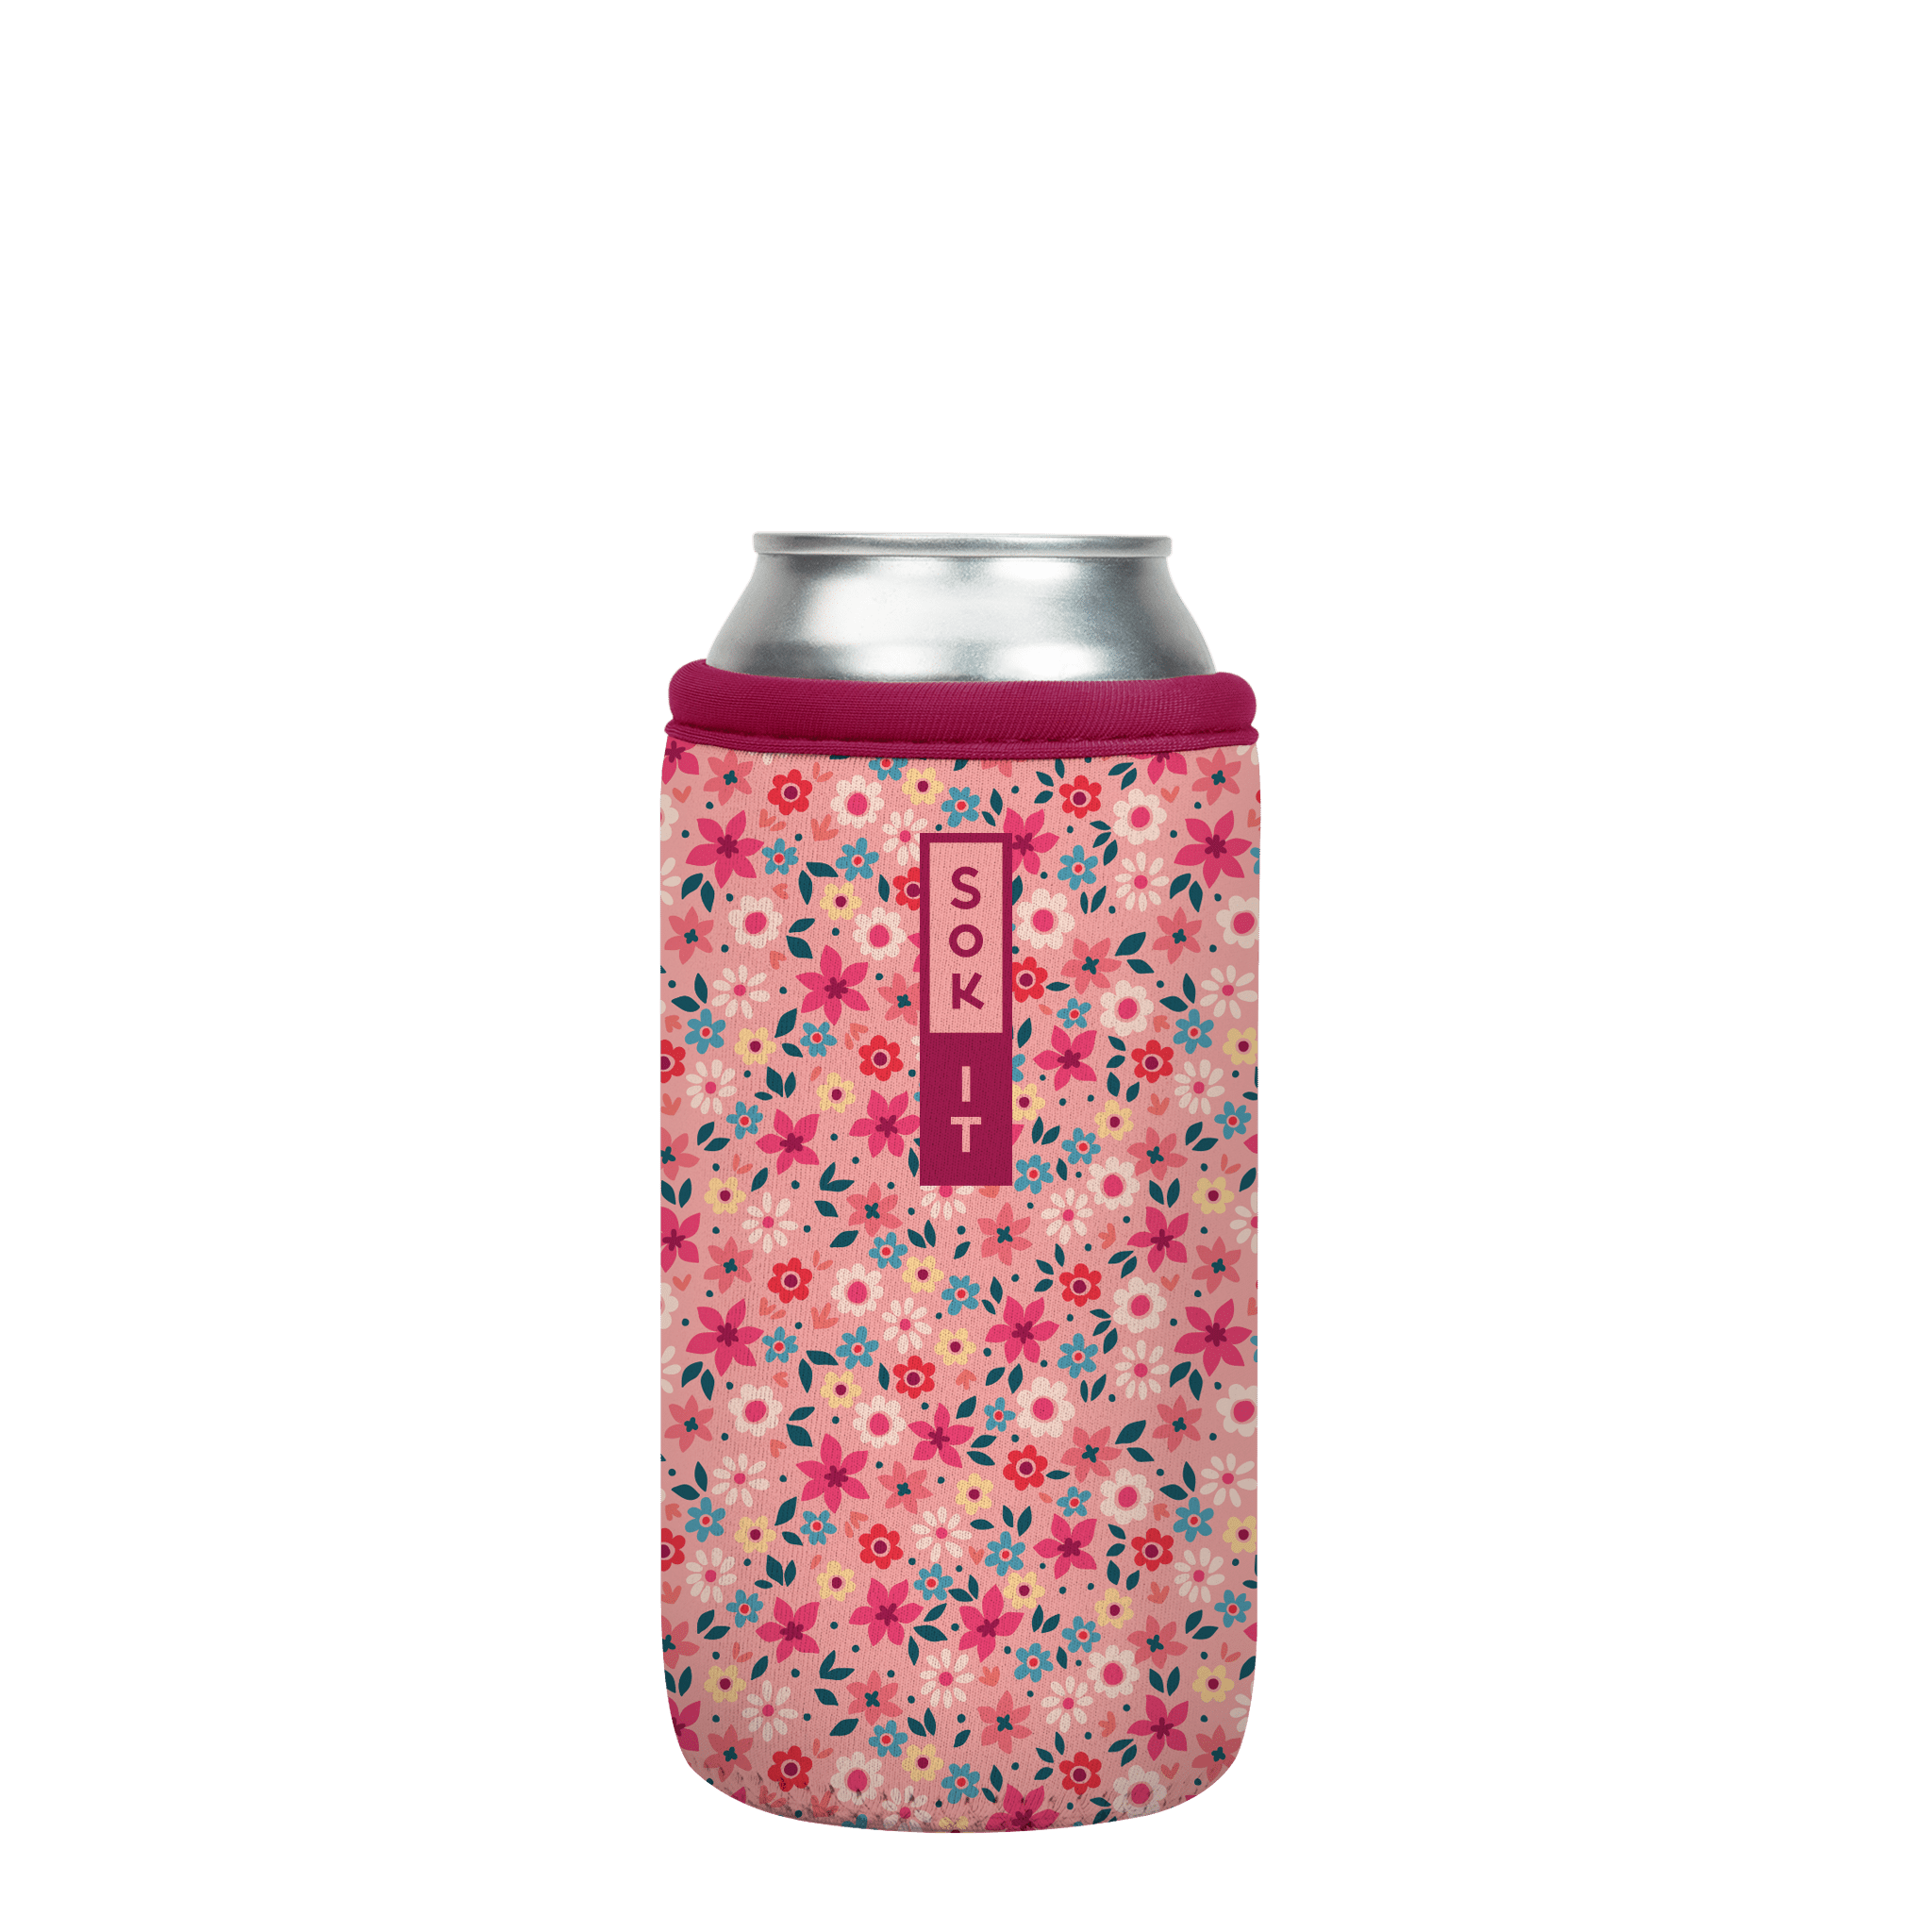 CanSok-Floral Spring Bouquet 16oz Can